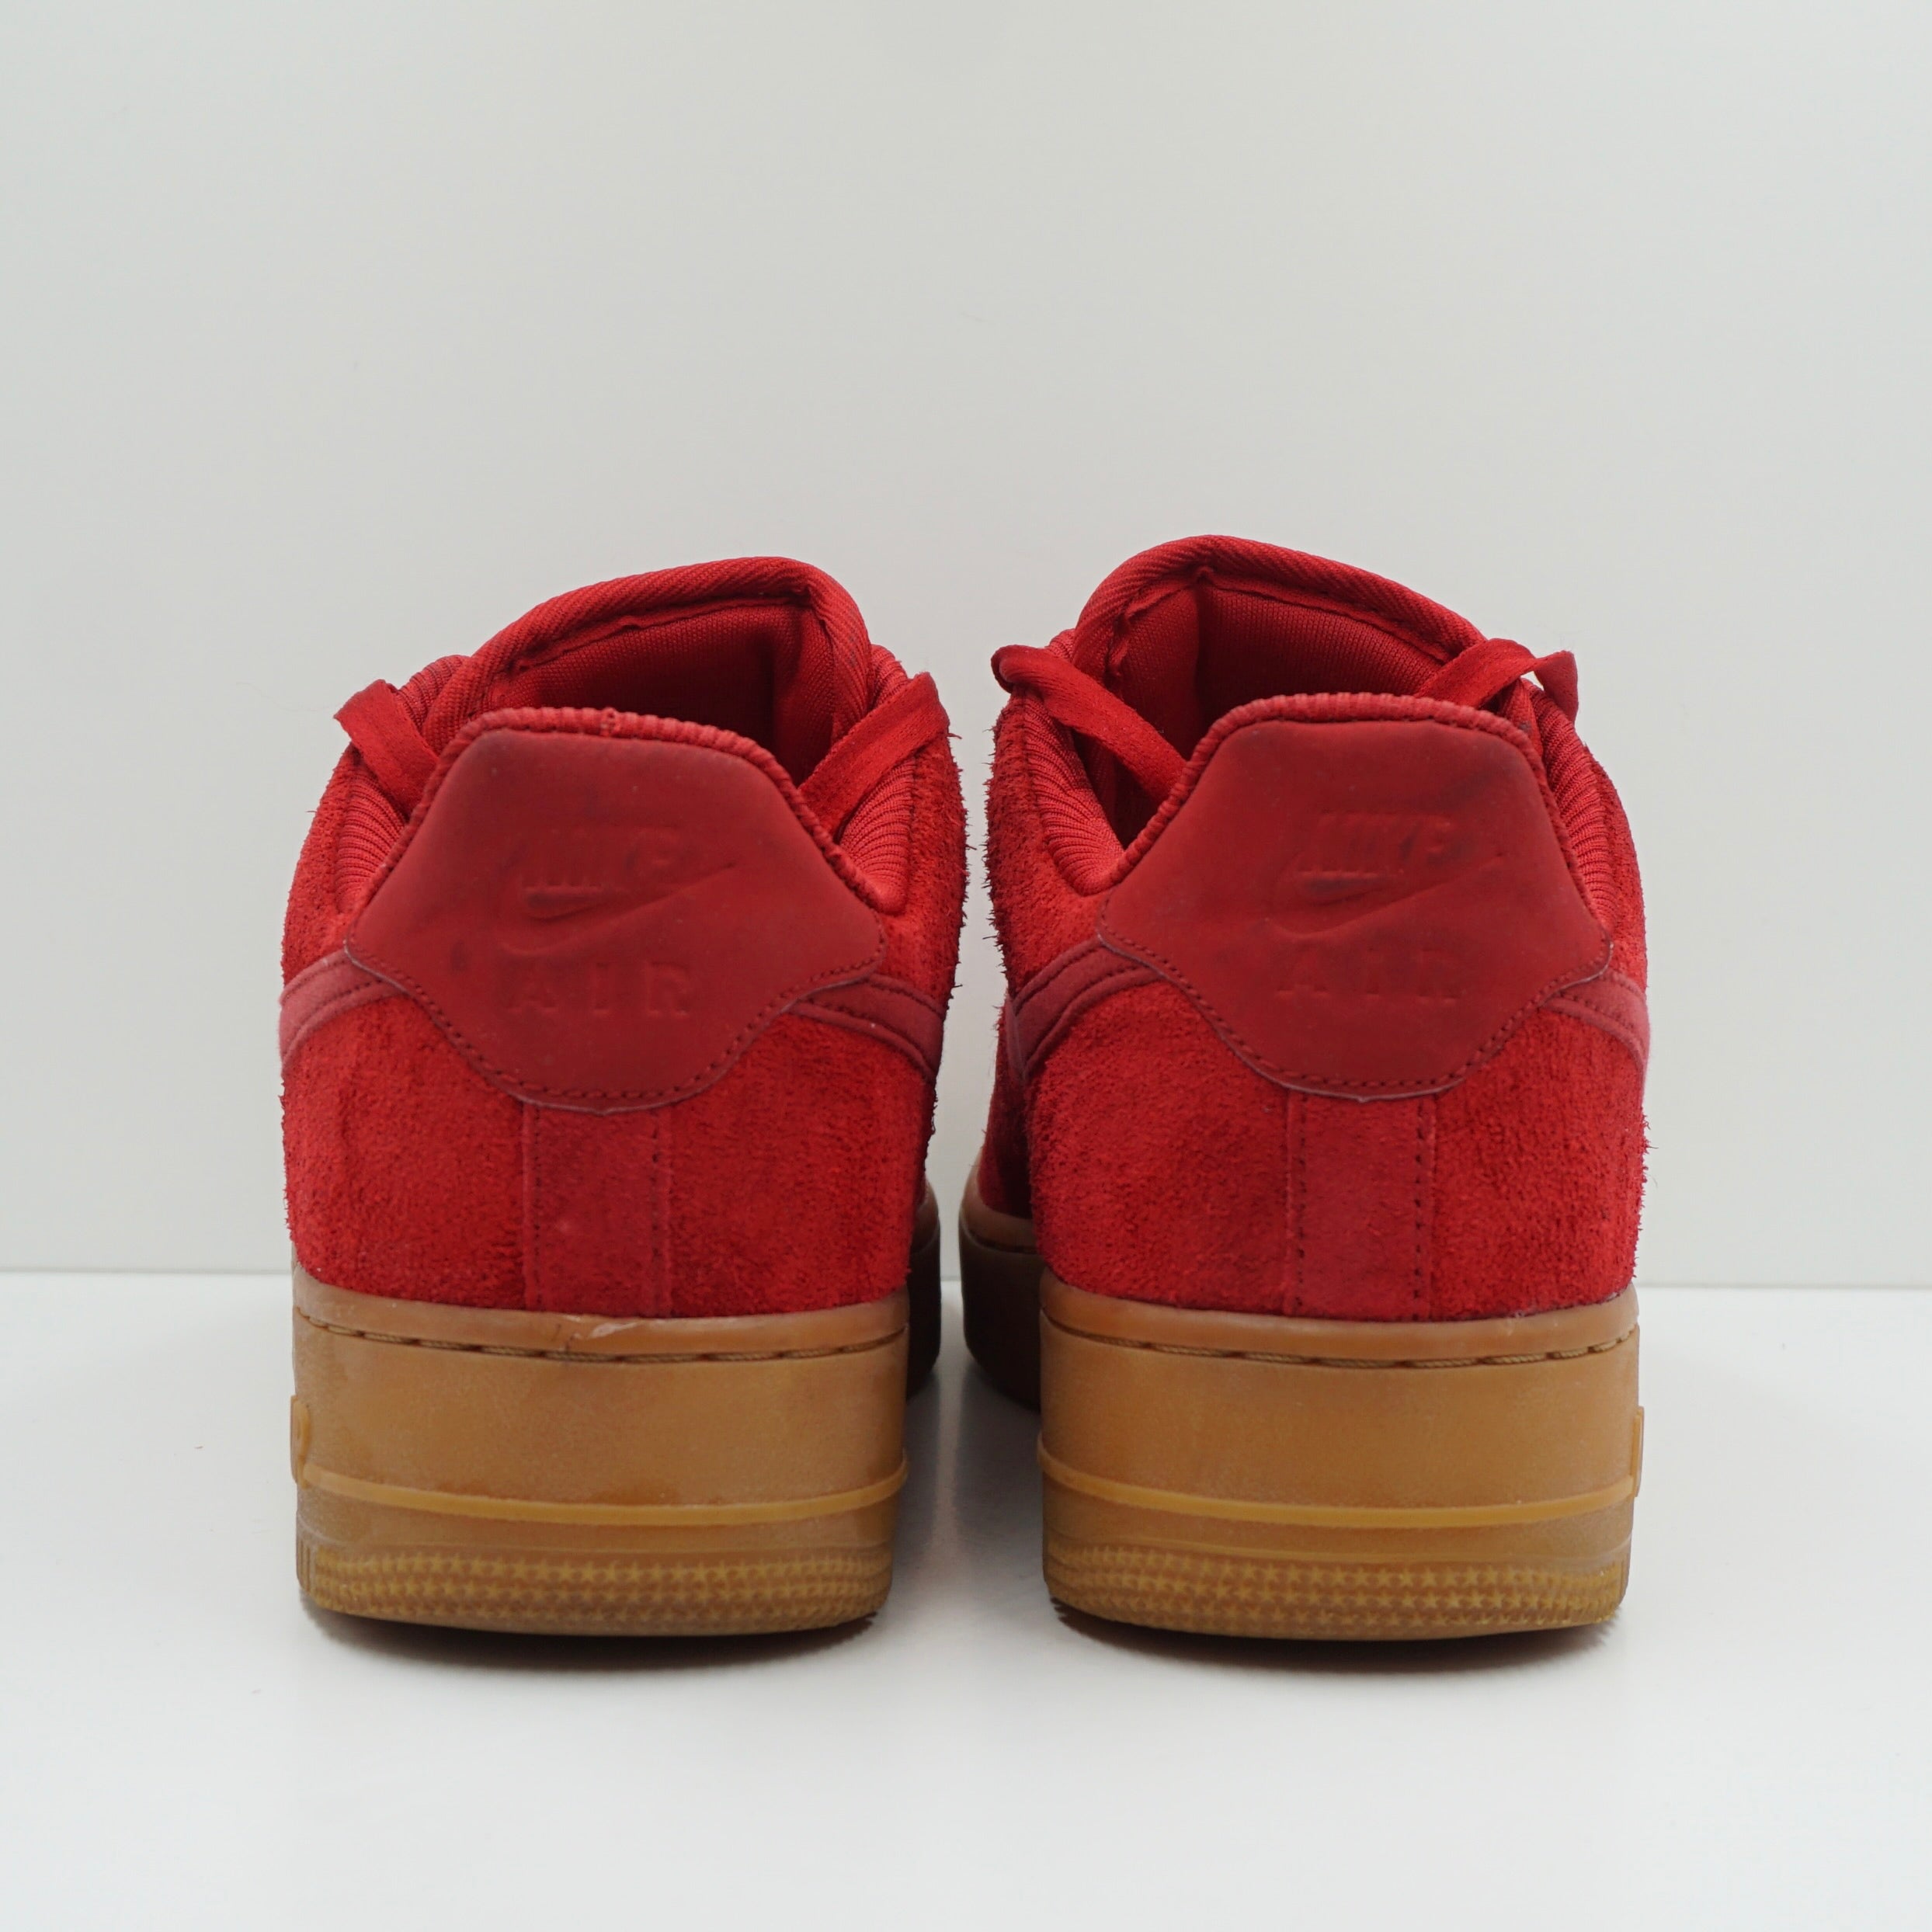 Nike Air Force 1 Low 07 SE Red Gum (W)